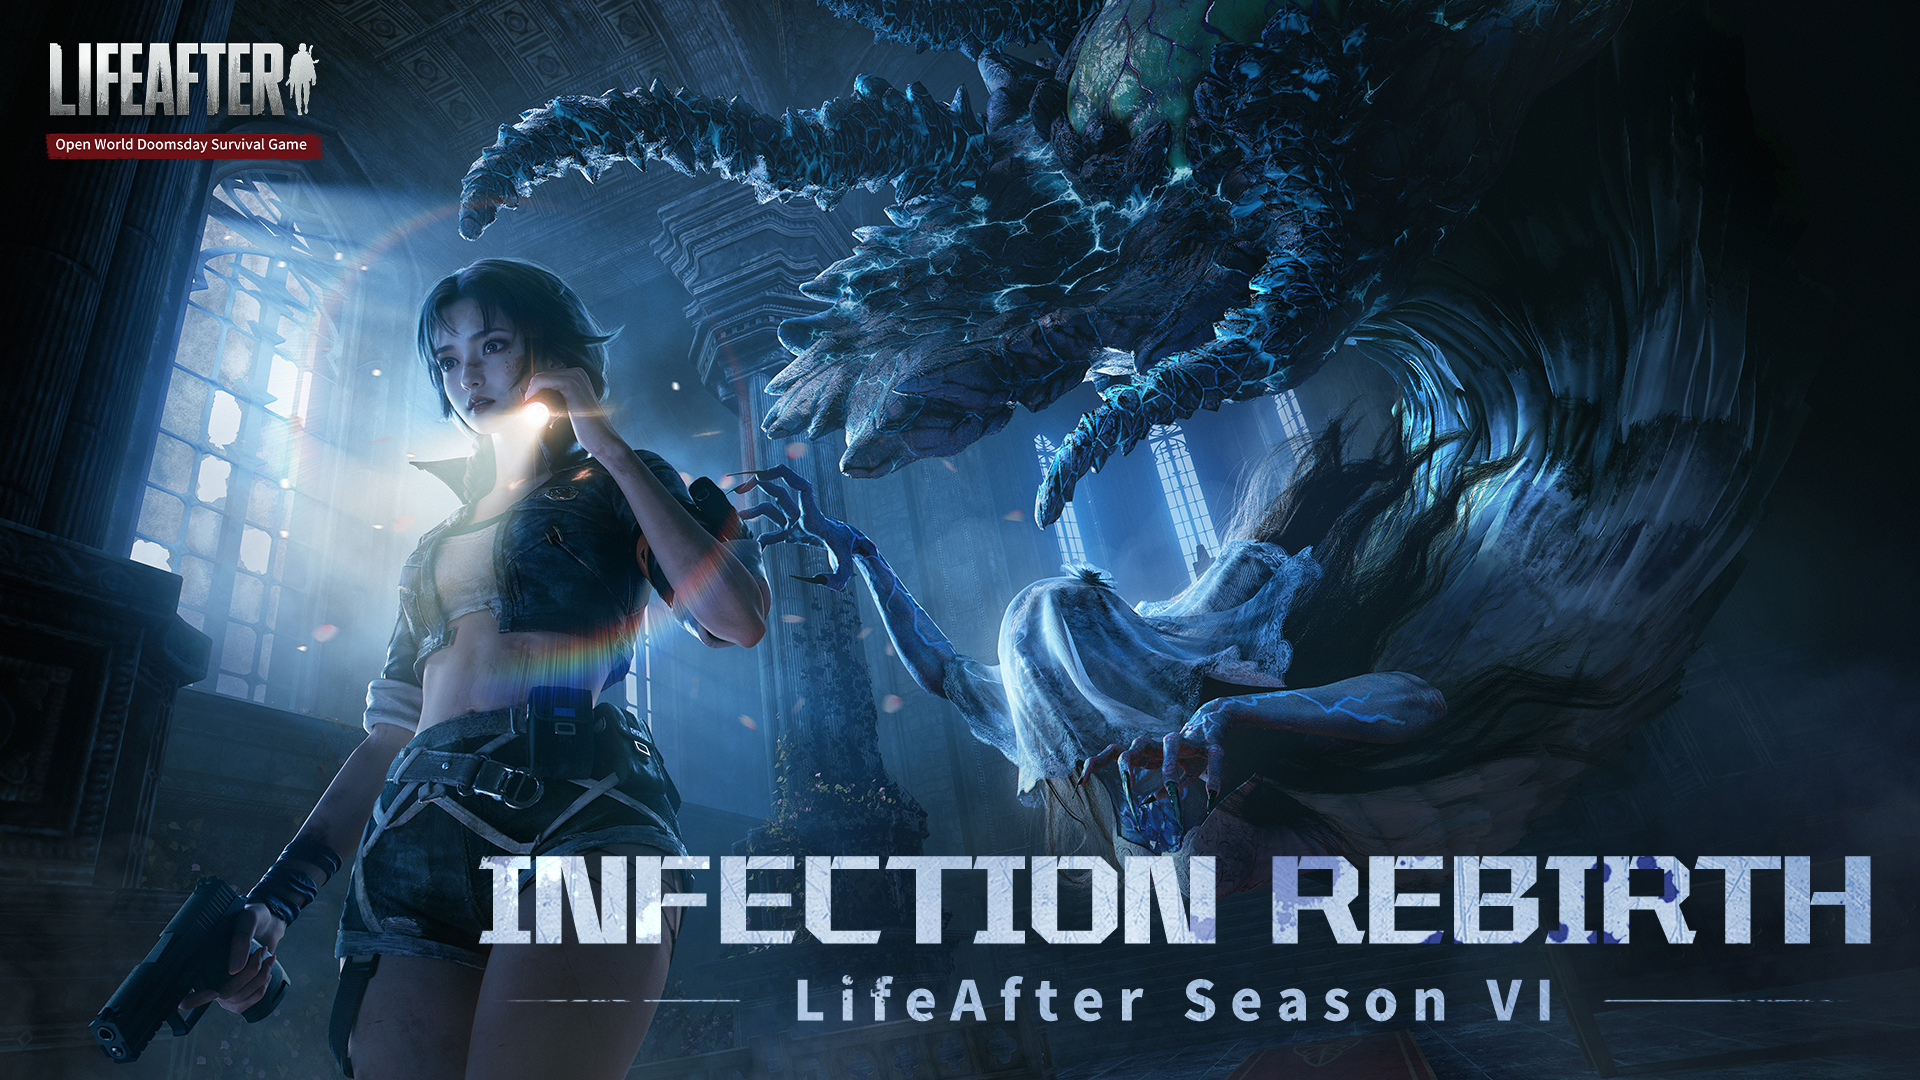 LifeAfter Season VI: Infection Rebirth has launched!